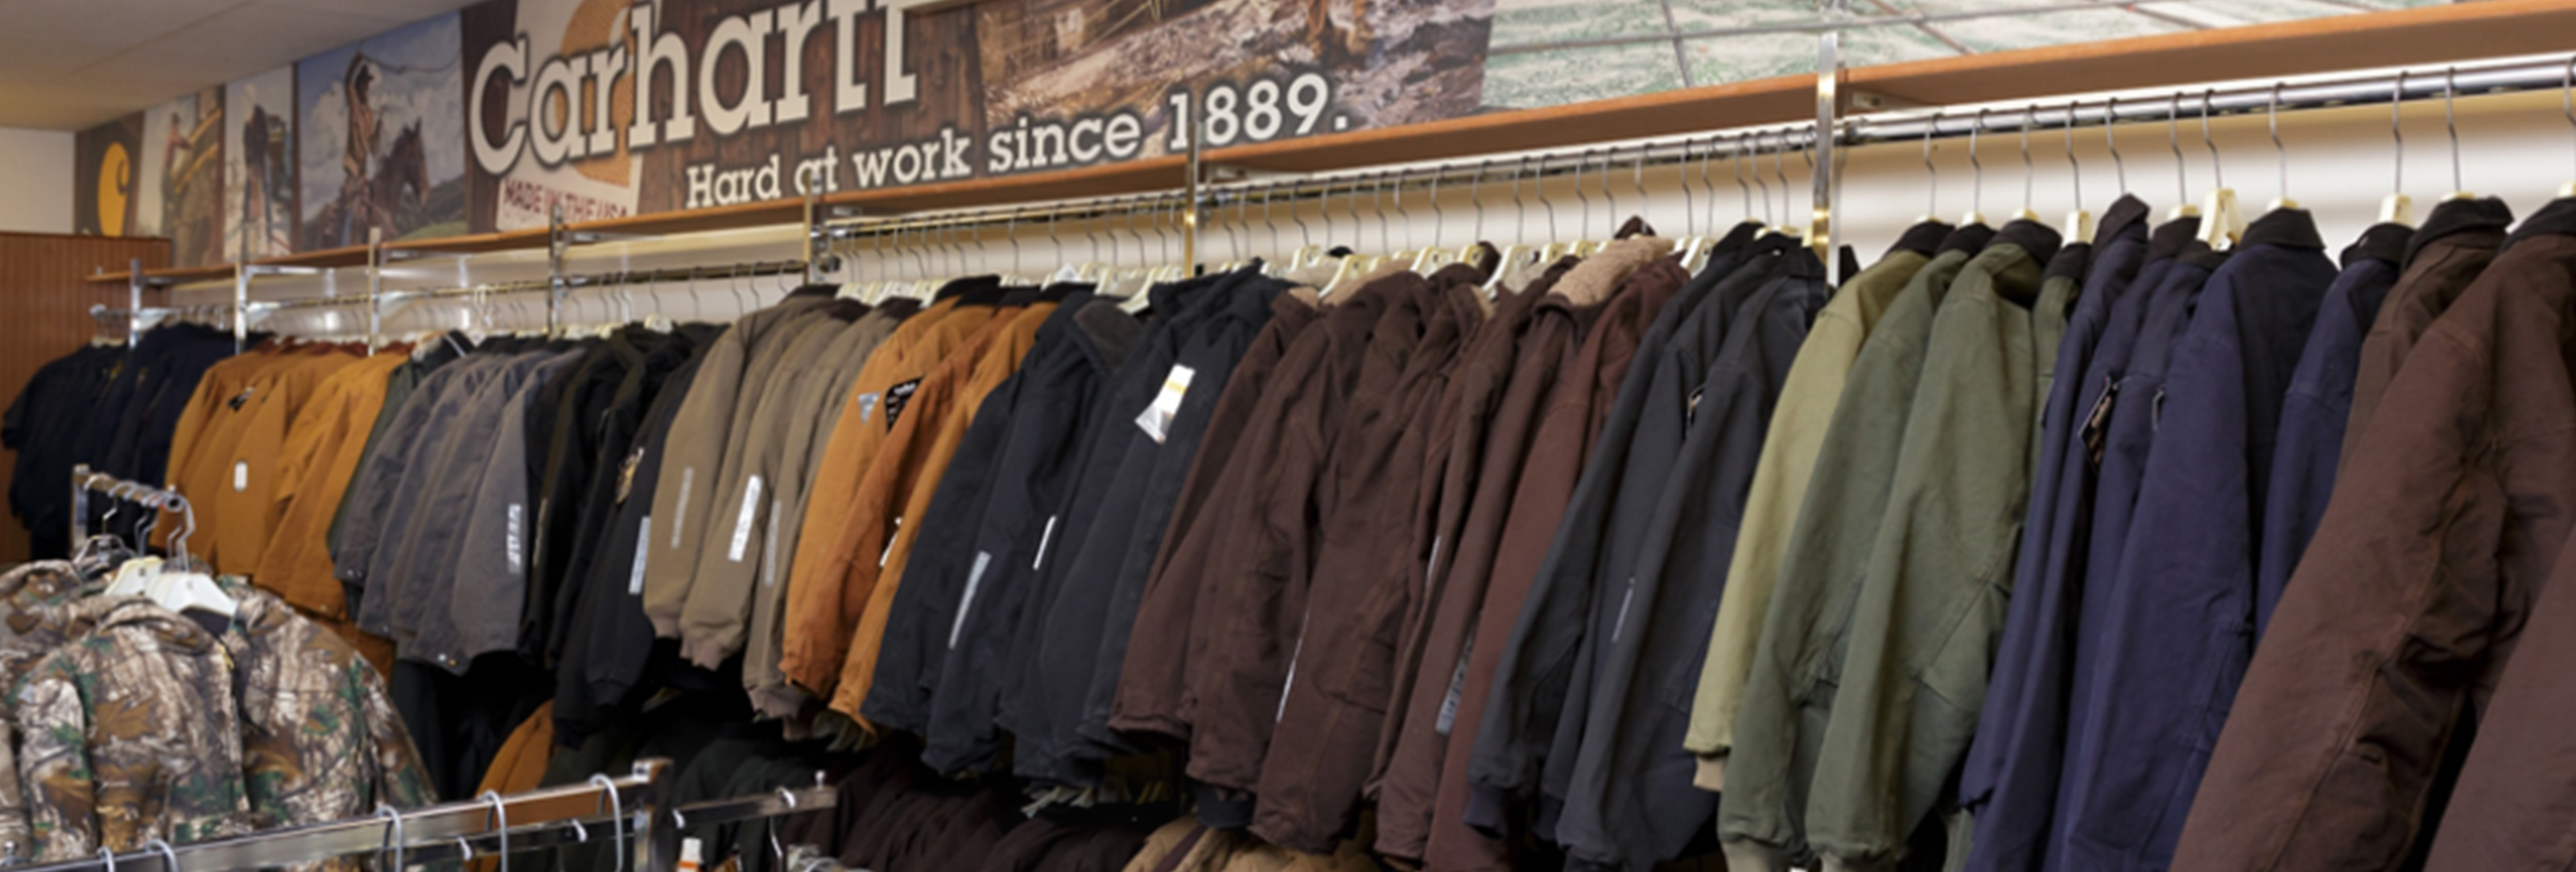 carhartt and work clothes